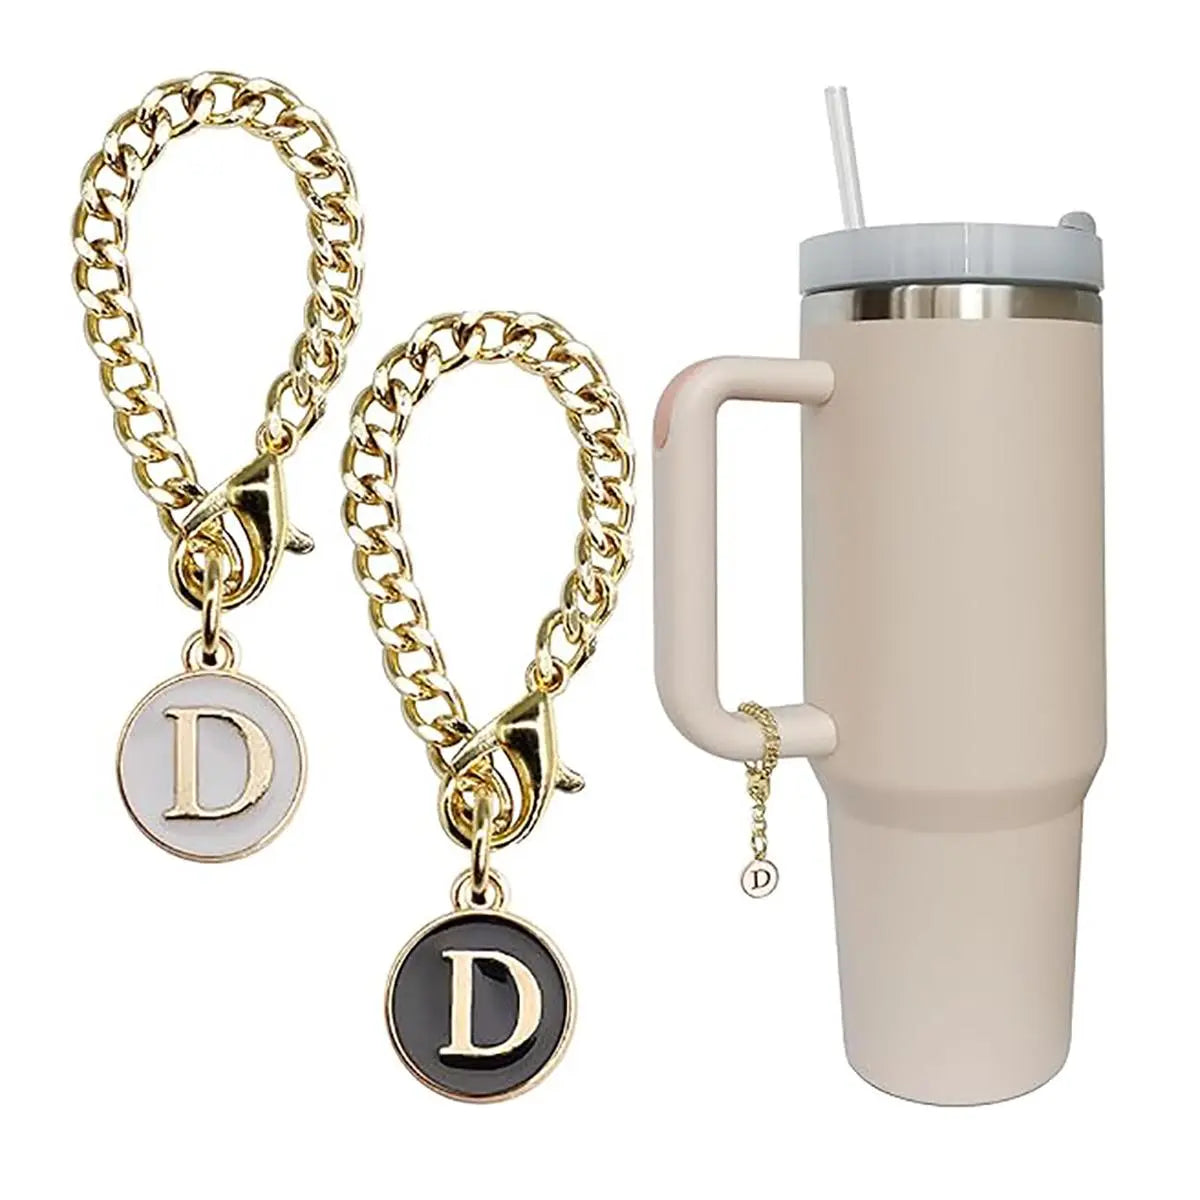 2Pcs Letter Charm Accessories for 20/30/40Oz Tumbler with Handle, Name ID Letter Handle Charm for Tumbler Cups Mug Bottles Decor, Birthday Gifts, Drinkware Accessories（ No Cups Included）